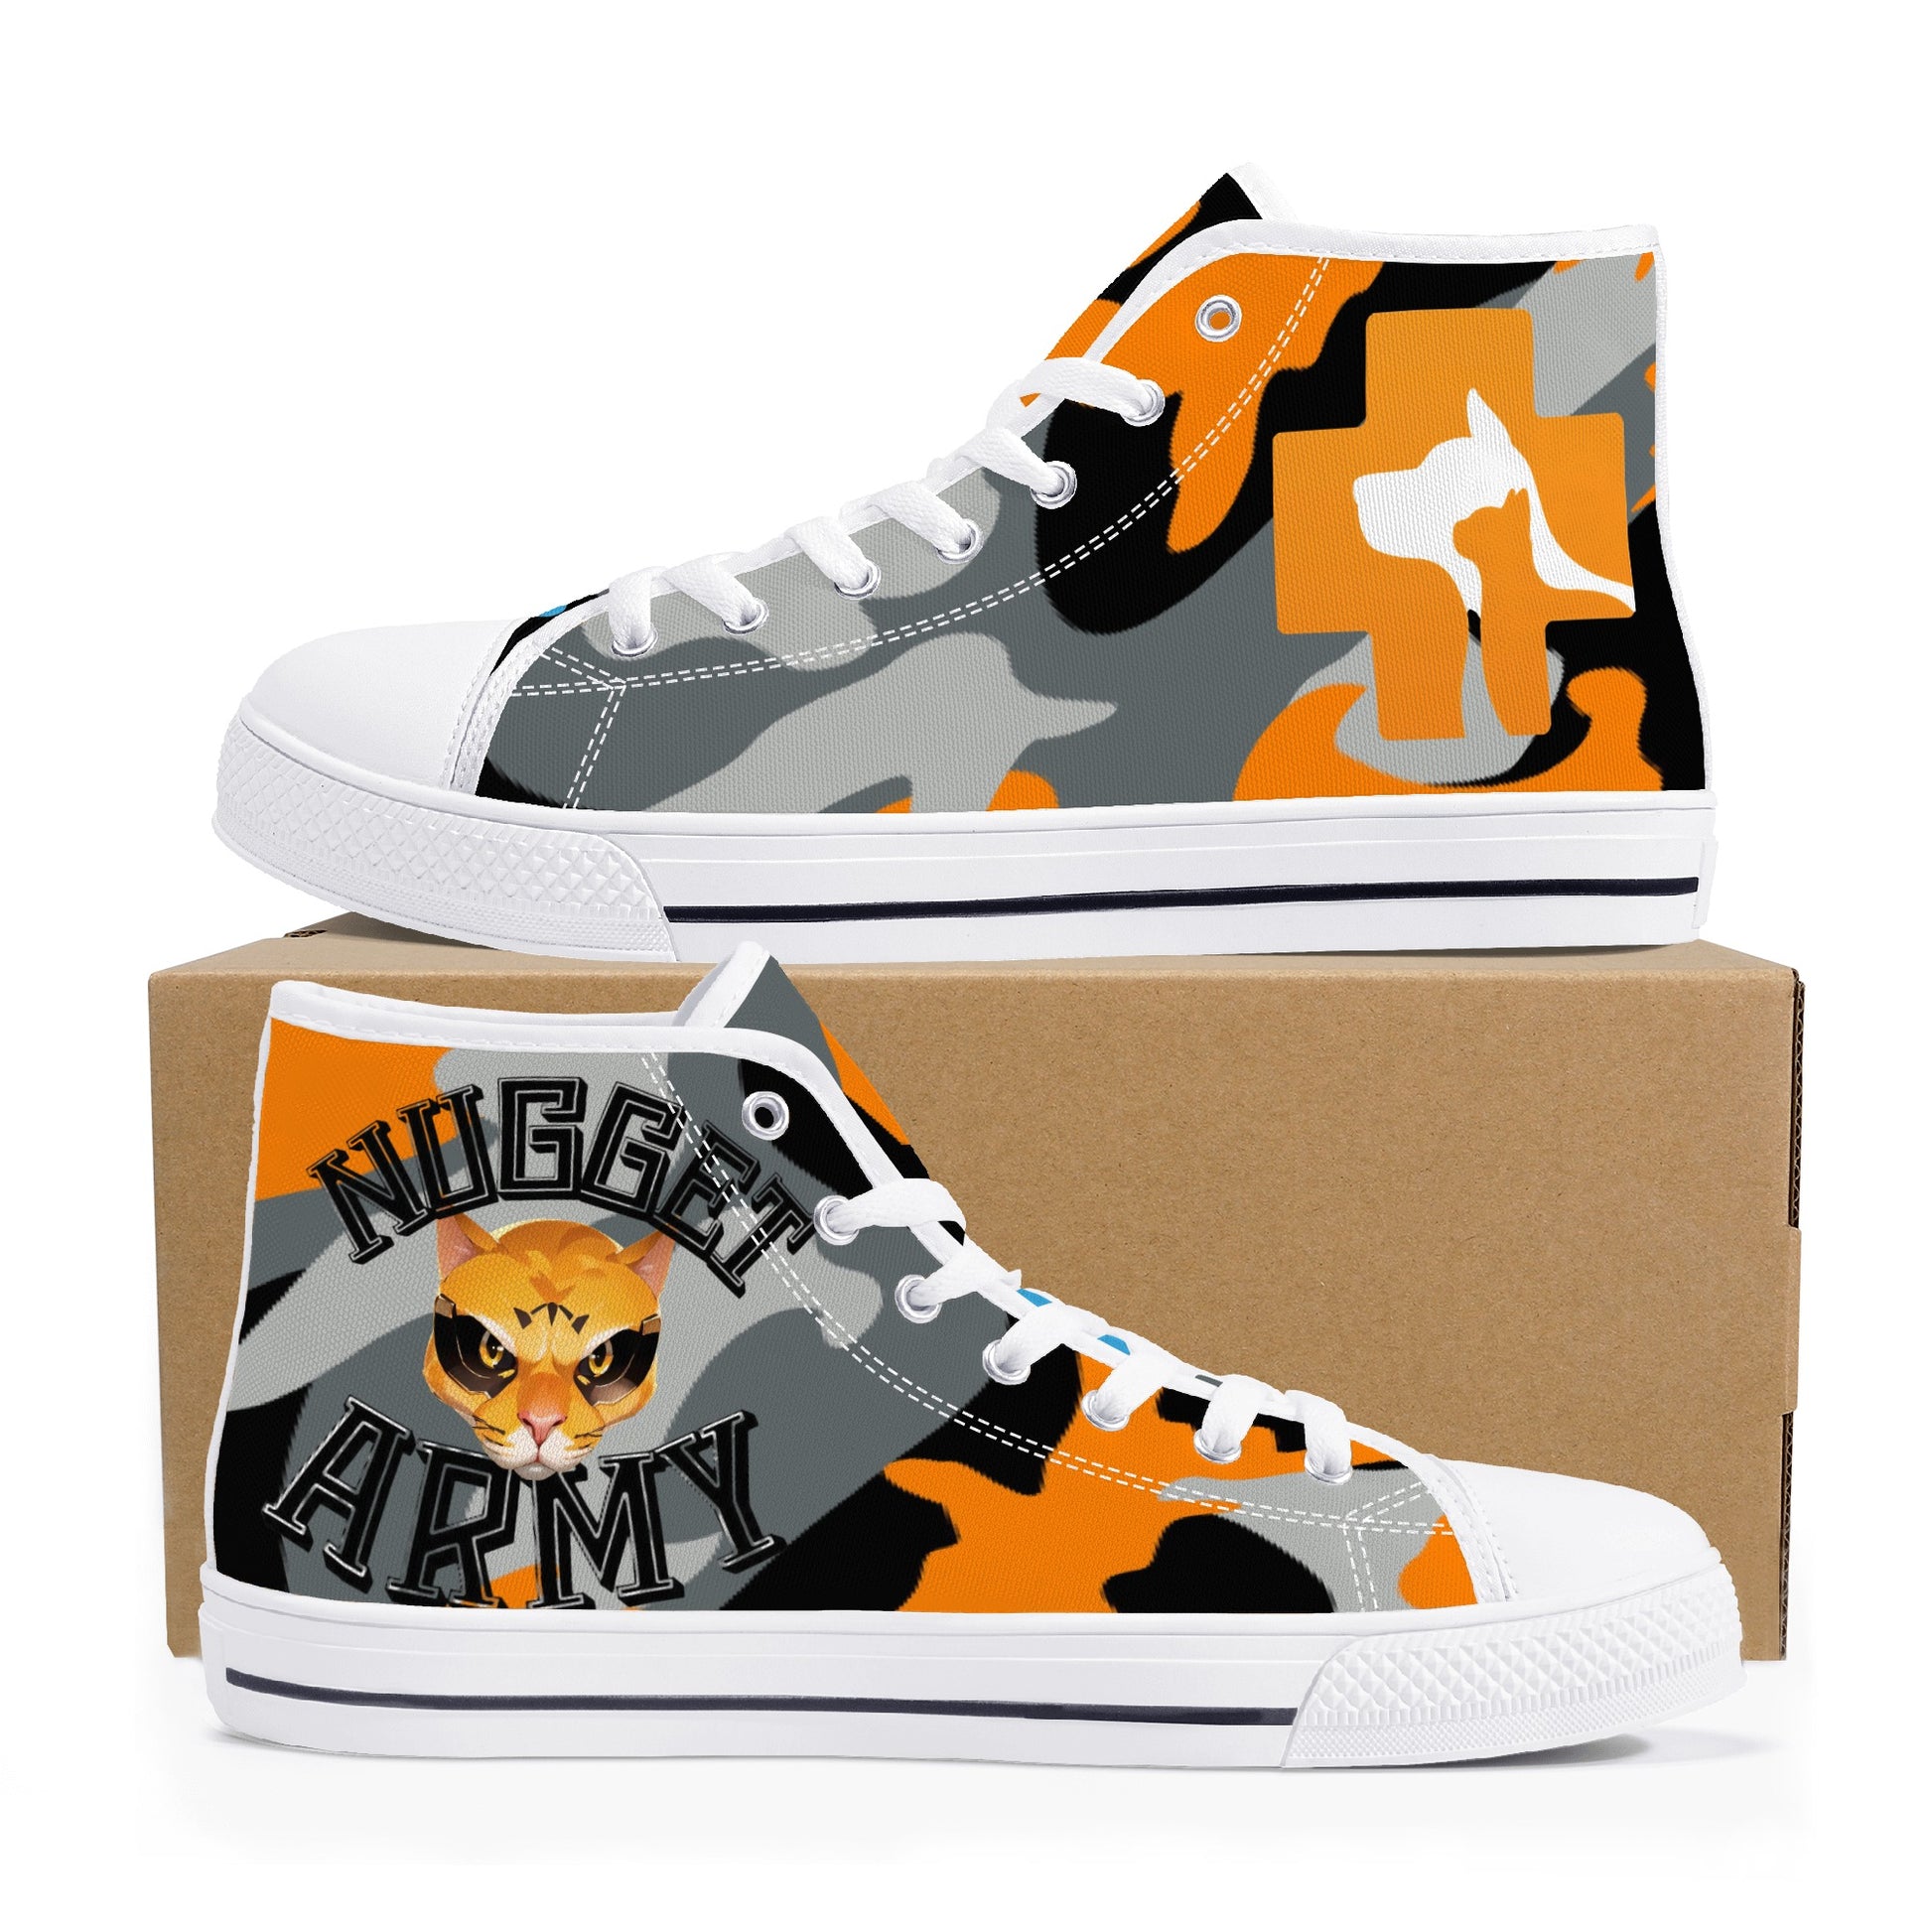 Stand out  with the  Nugget Army Vets Mens High Top Canvas Shoes  available at Hey Nugget. Grab yours today!